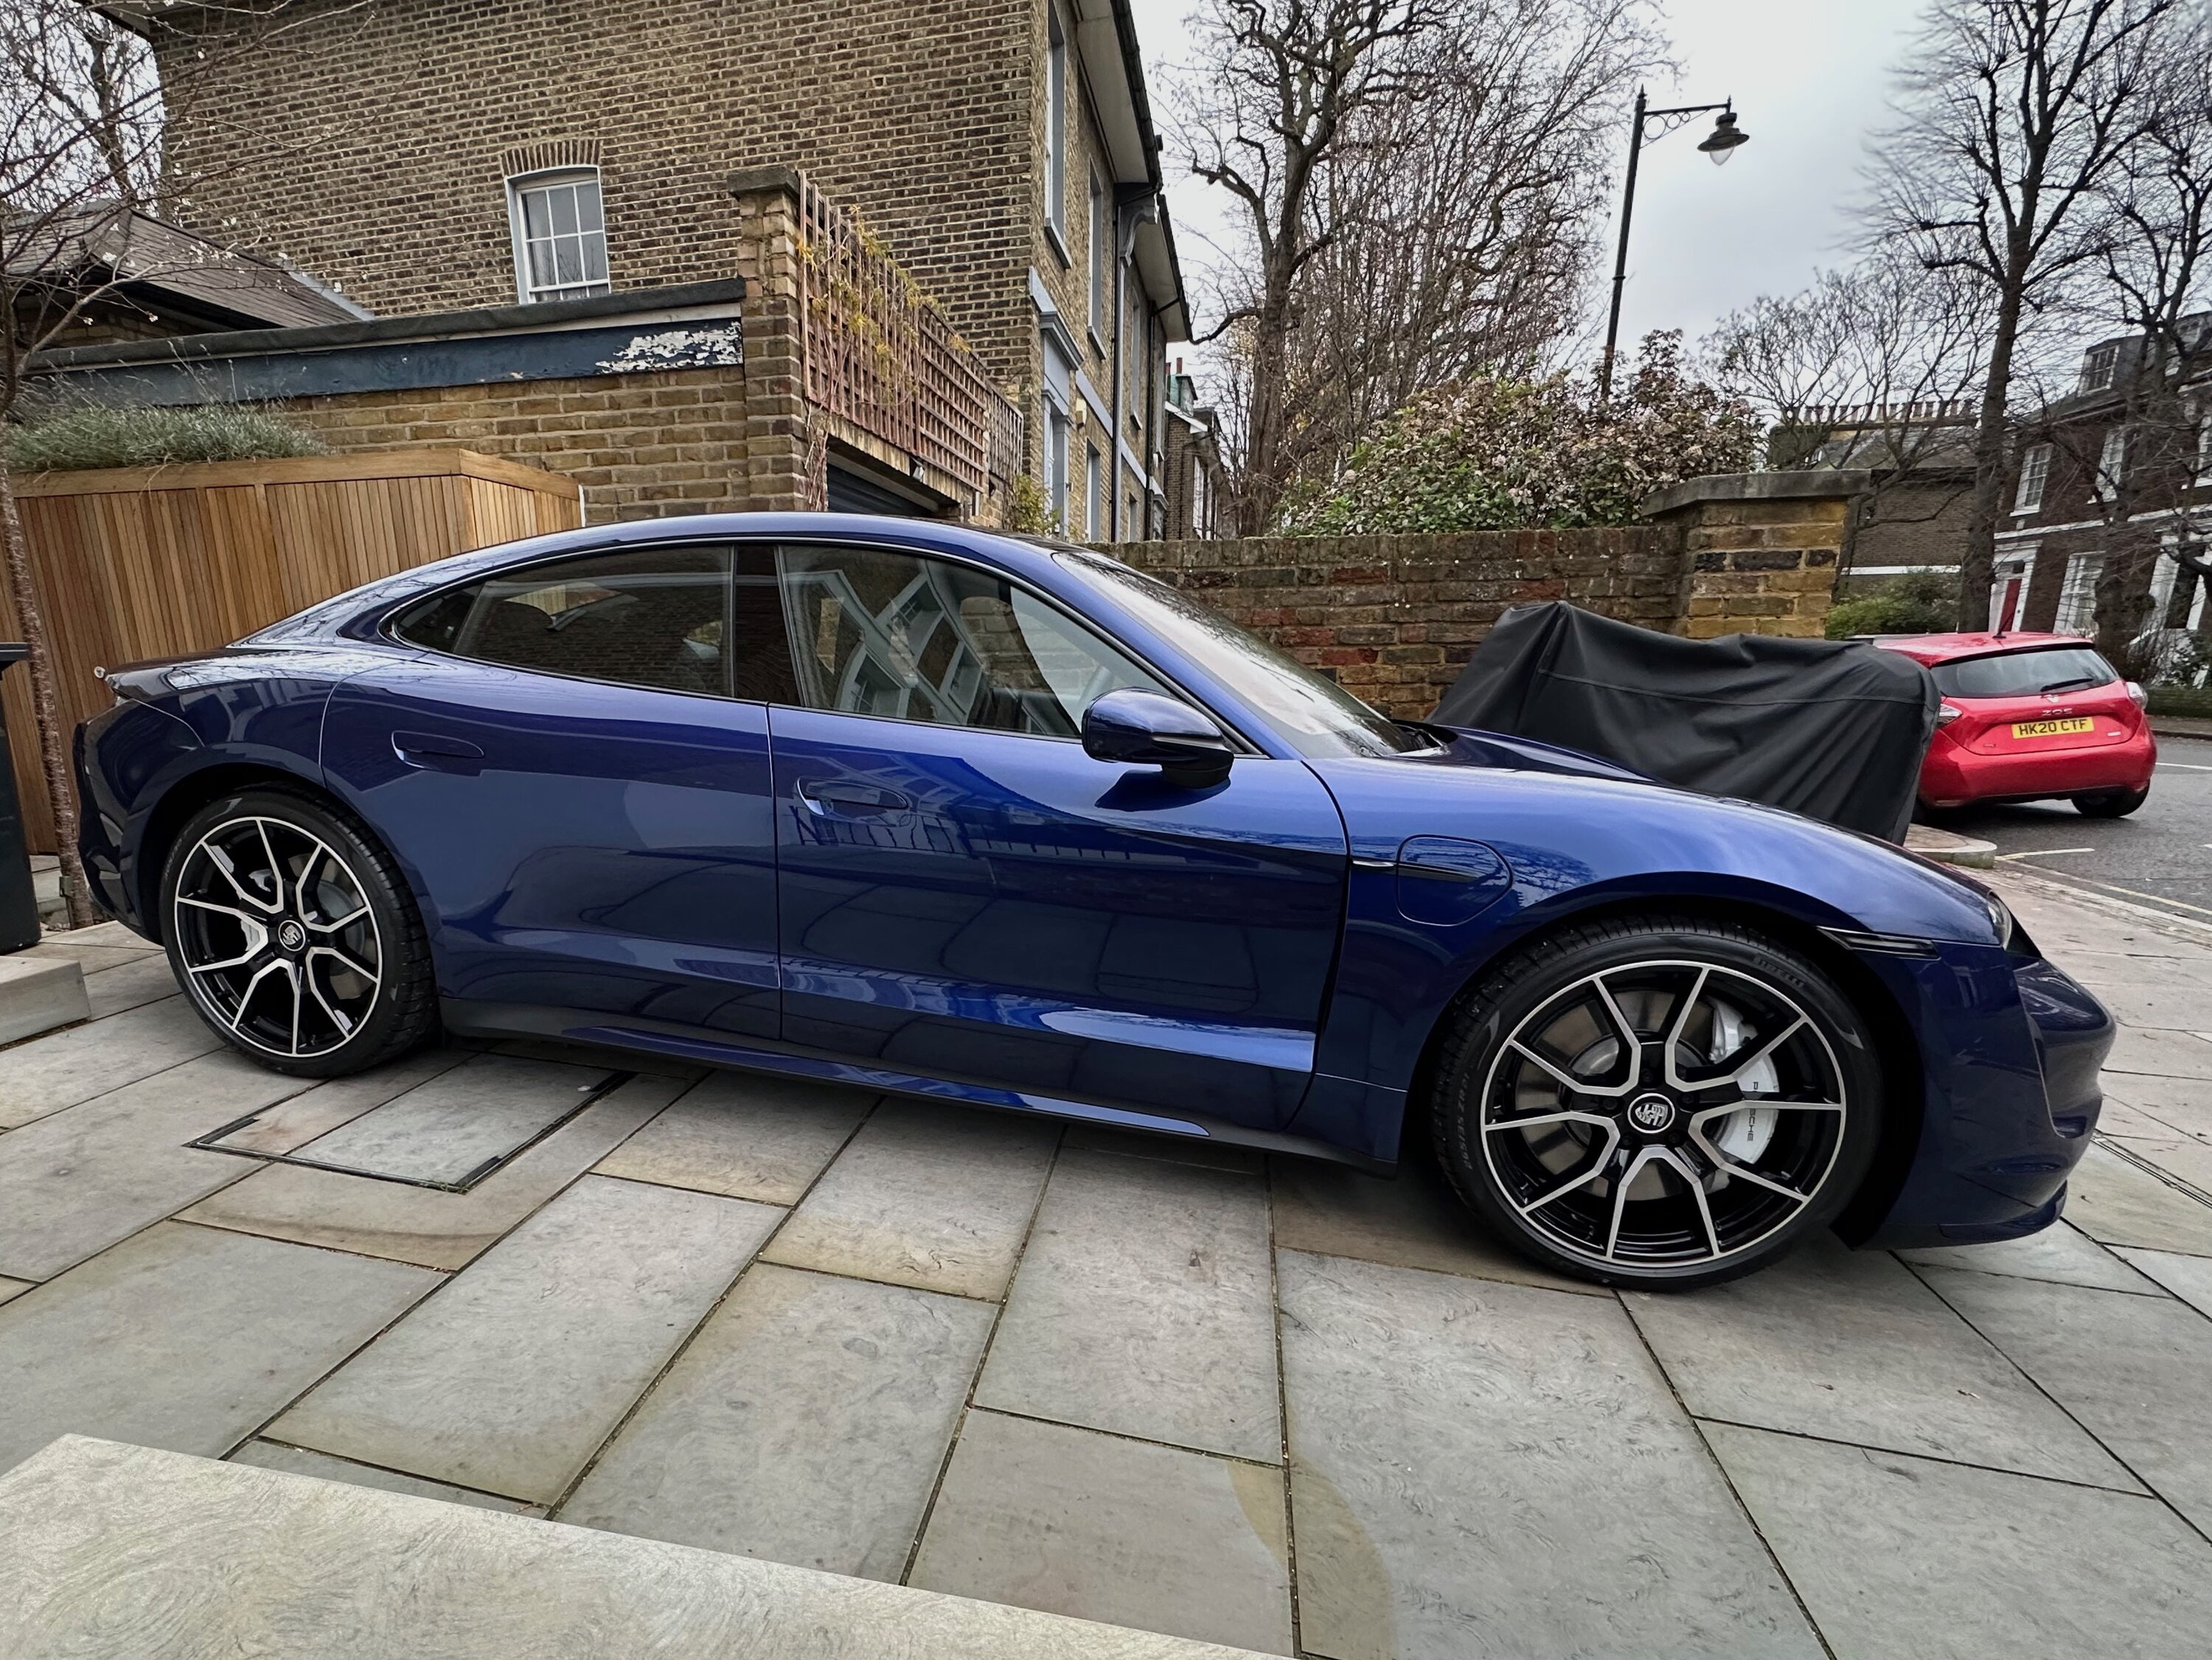 Porsche Taycan Gentian Blue Taycan Turbo just sneaks into 2022…🎄 Home and Dry sort of 2